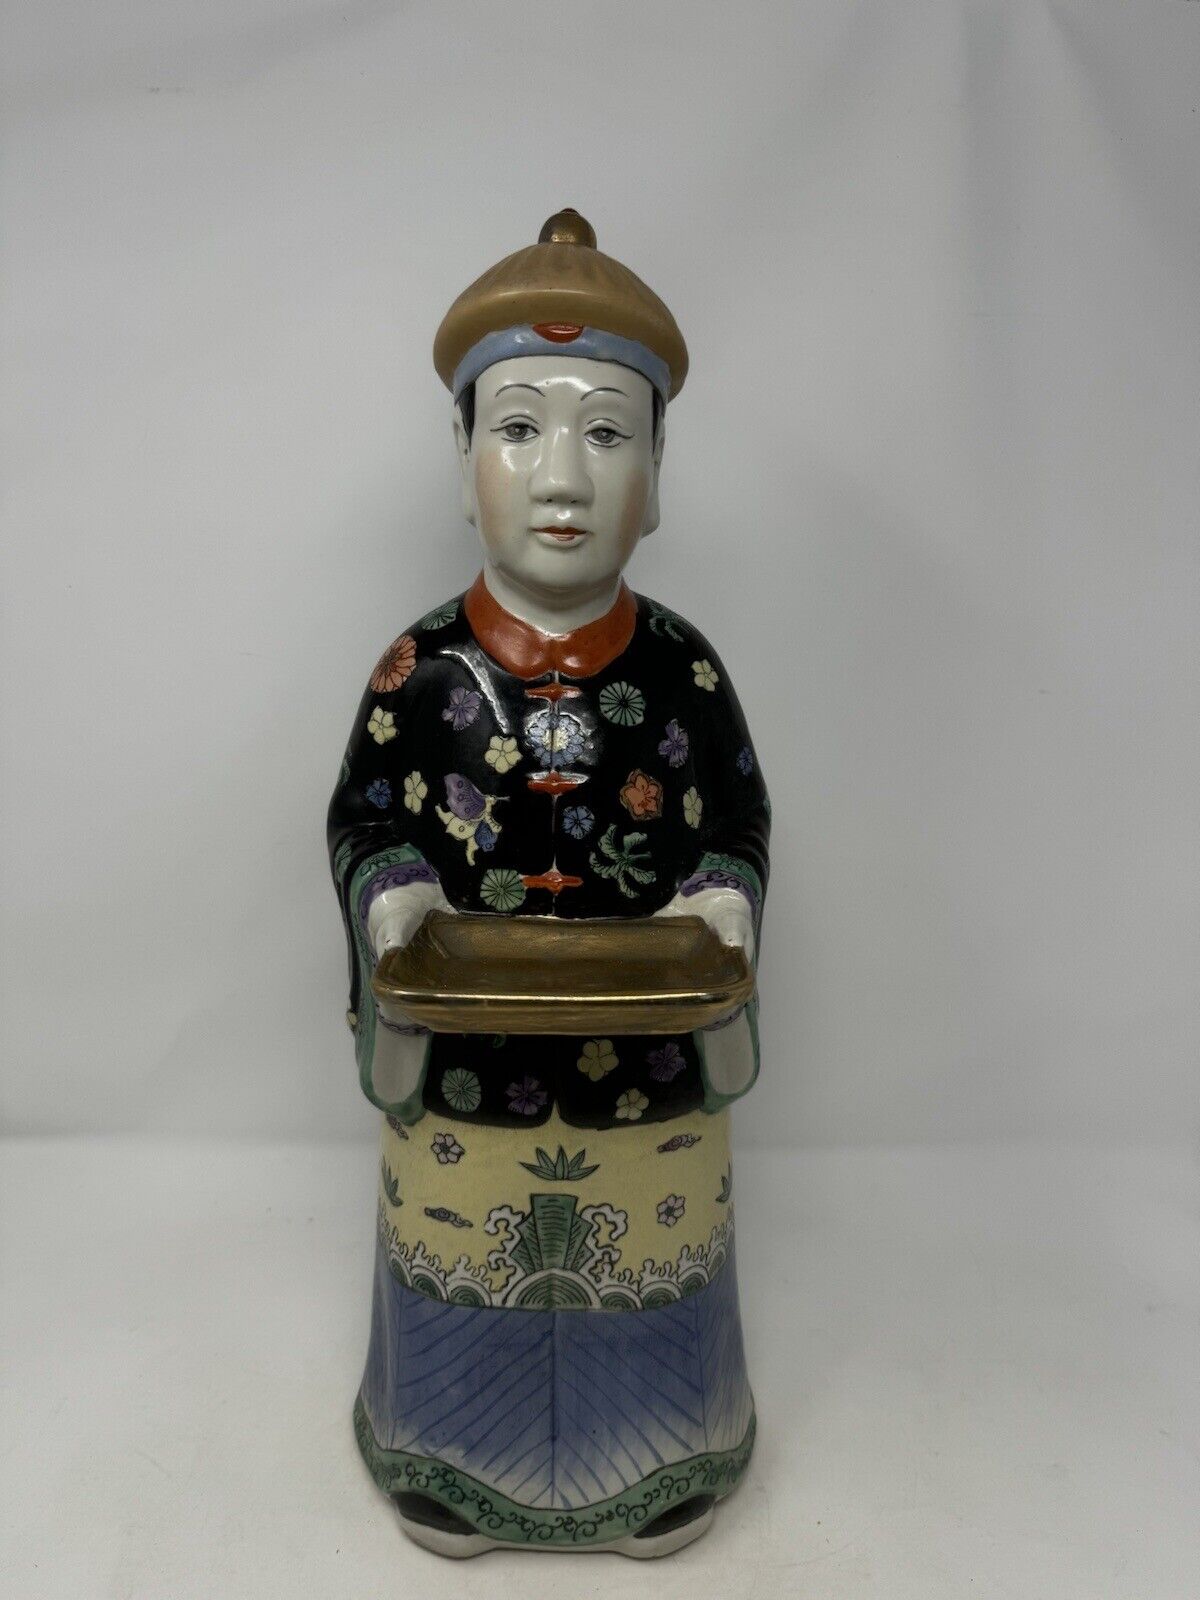 asian man statue large 18” floral robe holding serving tray heavy decor ceramic